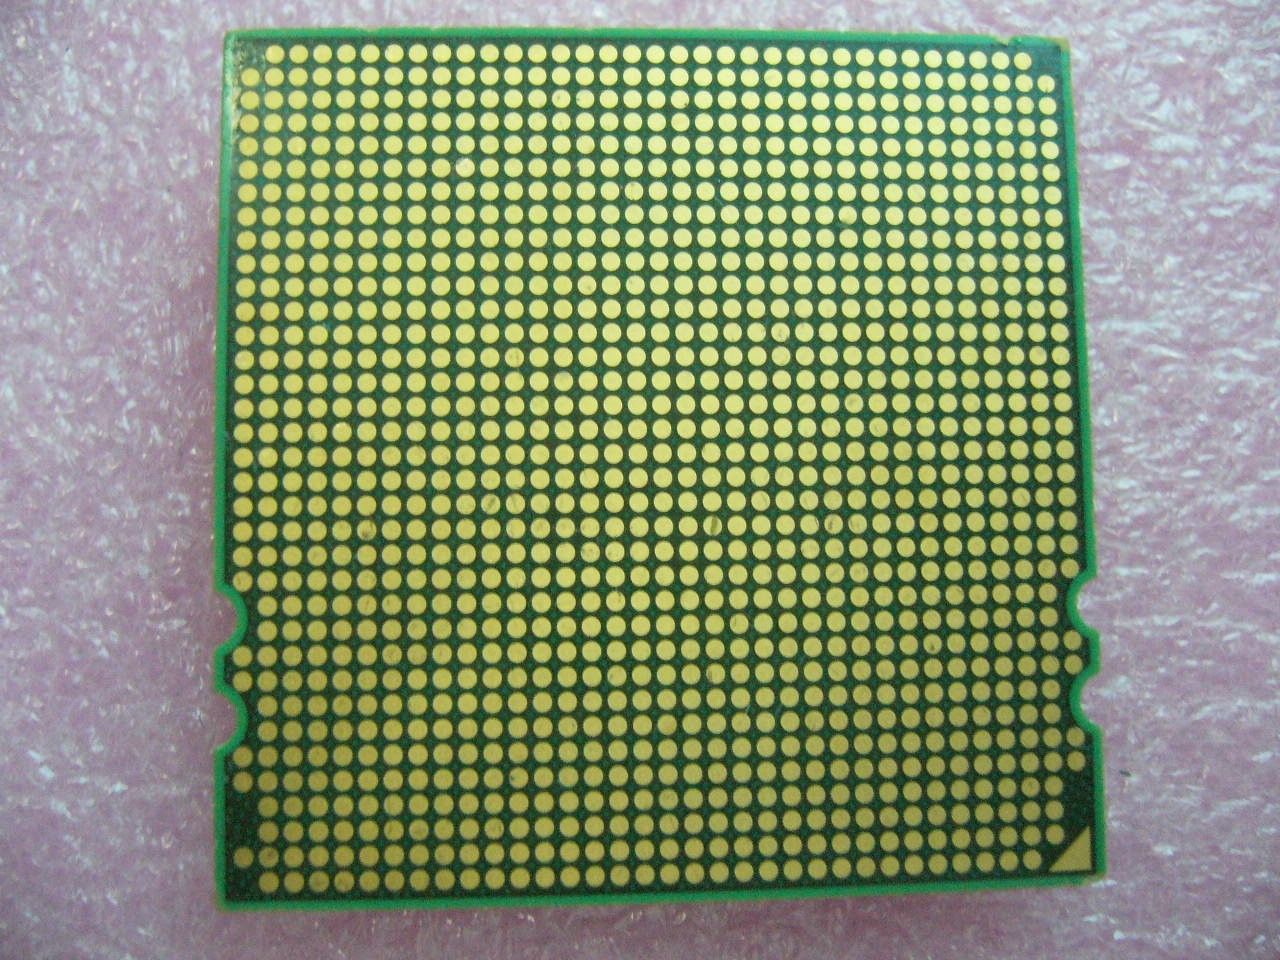 QTY 1x AMD Opteron 8387 2.8 GHz Quad-Core (OS8387WHP4DG) CPU Socket F 1207 - Click Image to Close